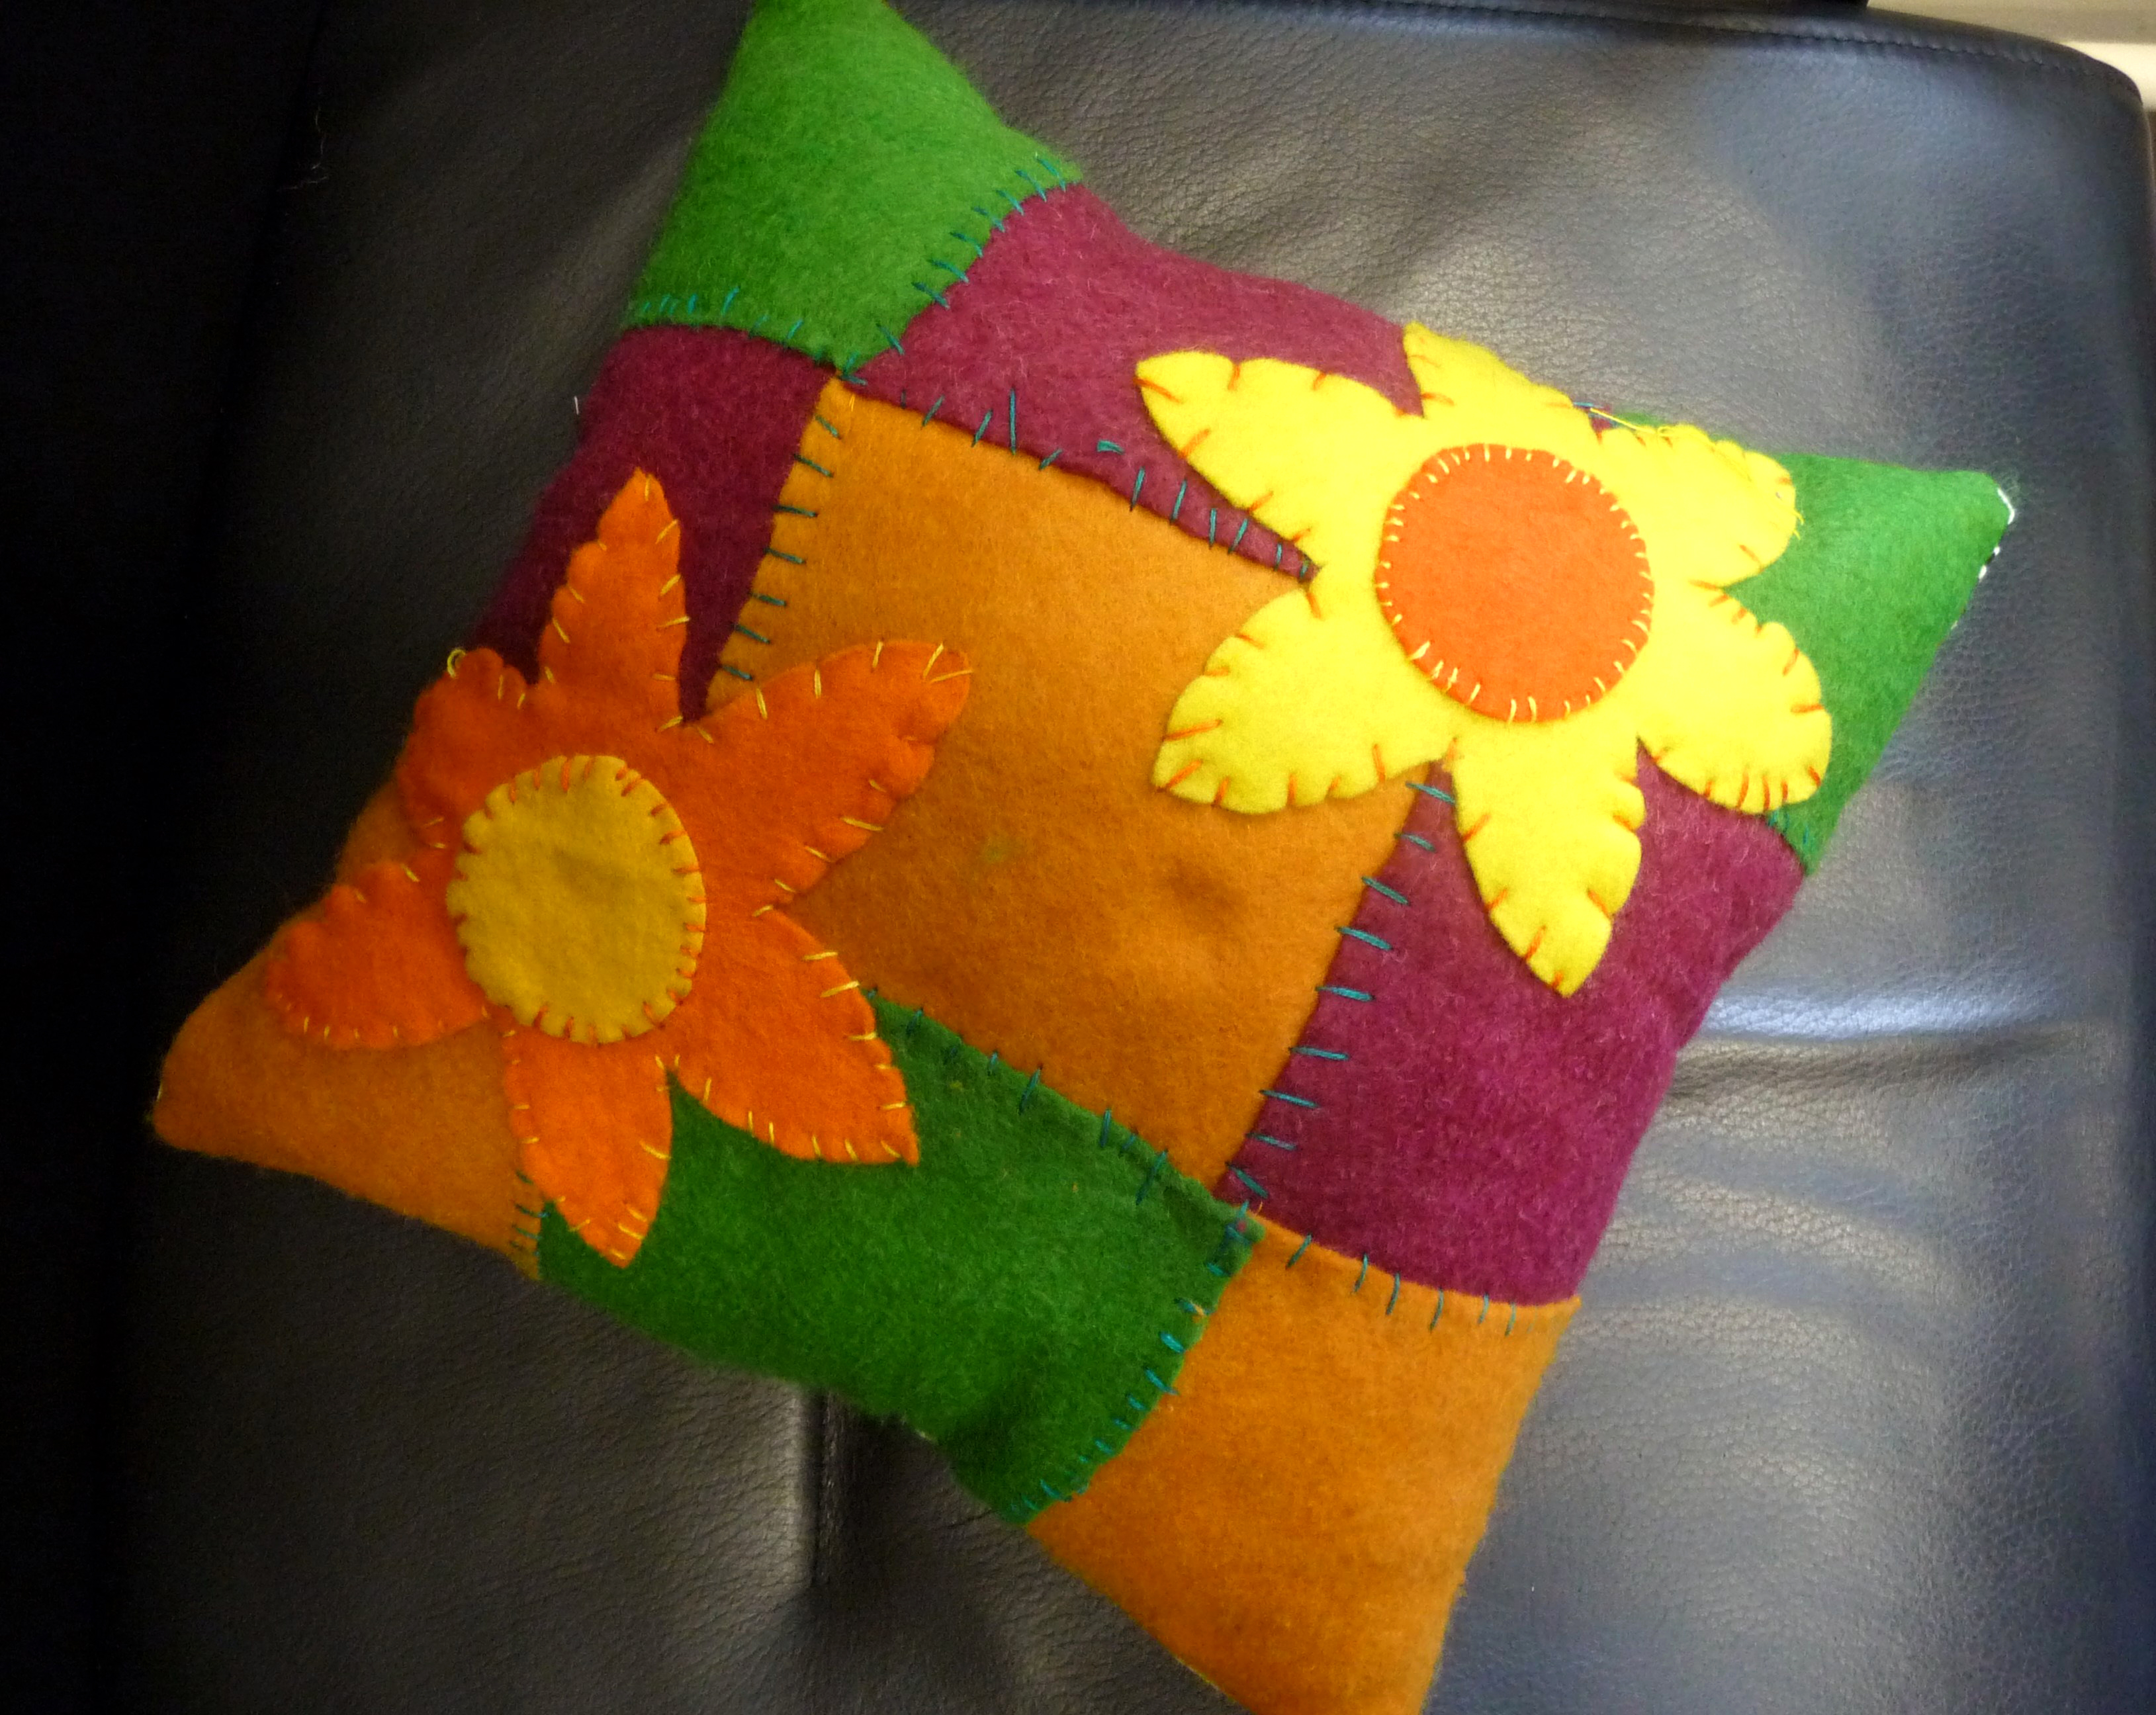 first completed applique cushion at YE group 2015